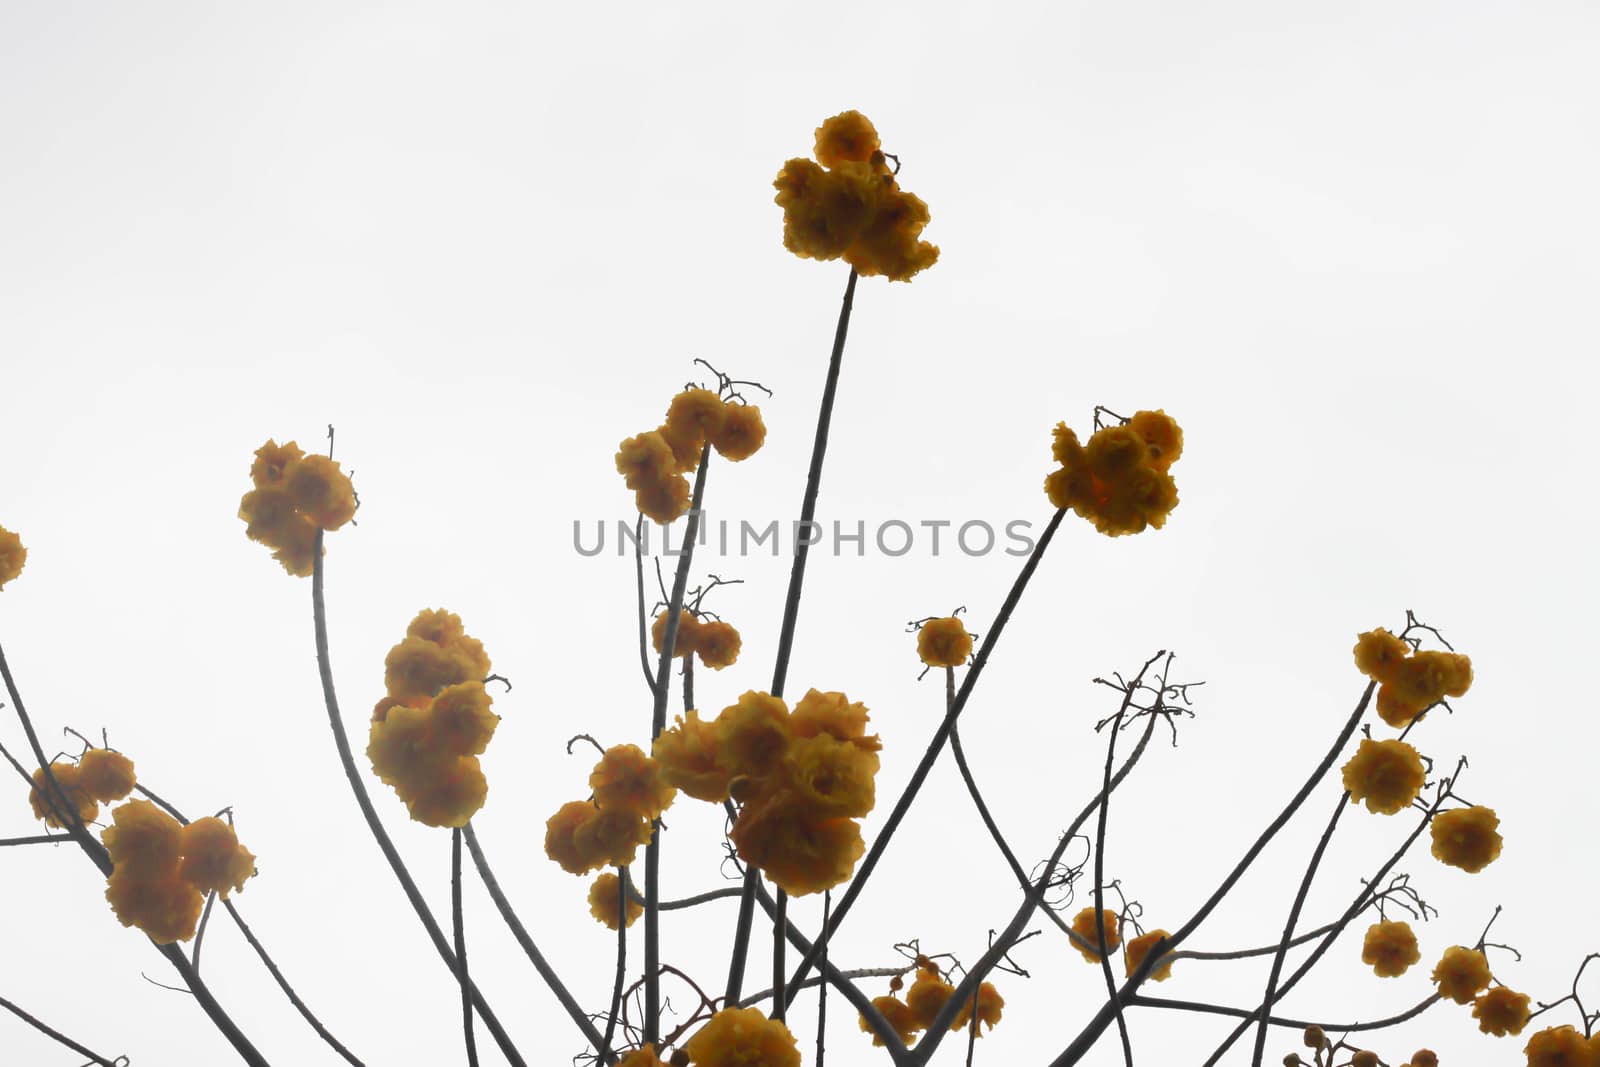 Tree with yellow flowers and sky. by primzrider